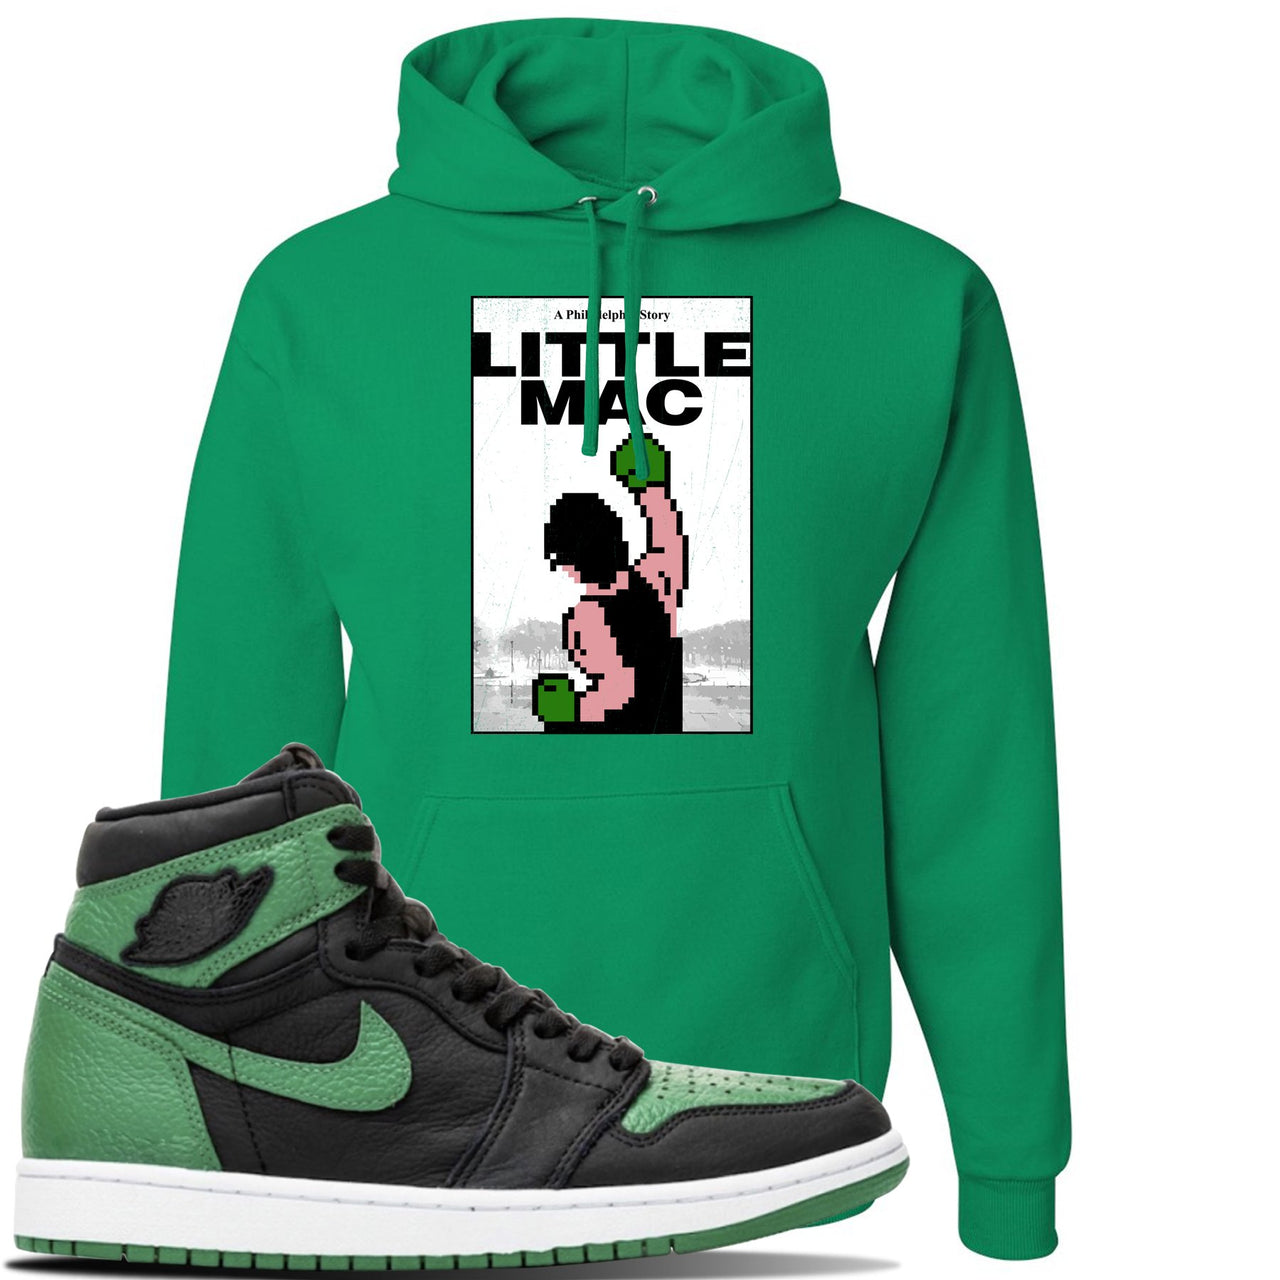 Jordan 1 Retro High OG Pine Green Gym Sneaker Kelly Green Pullover Hoodie | Hoodie to match Air Jordan 1 Retro High OG Pine Green Gym Shoes | Little Mac A Philly Story